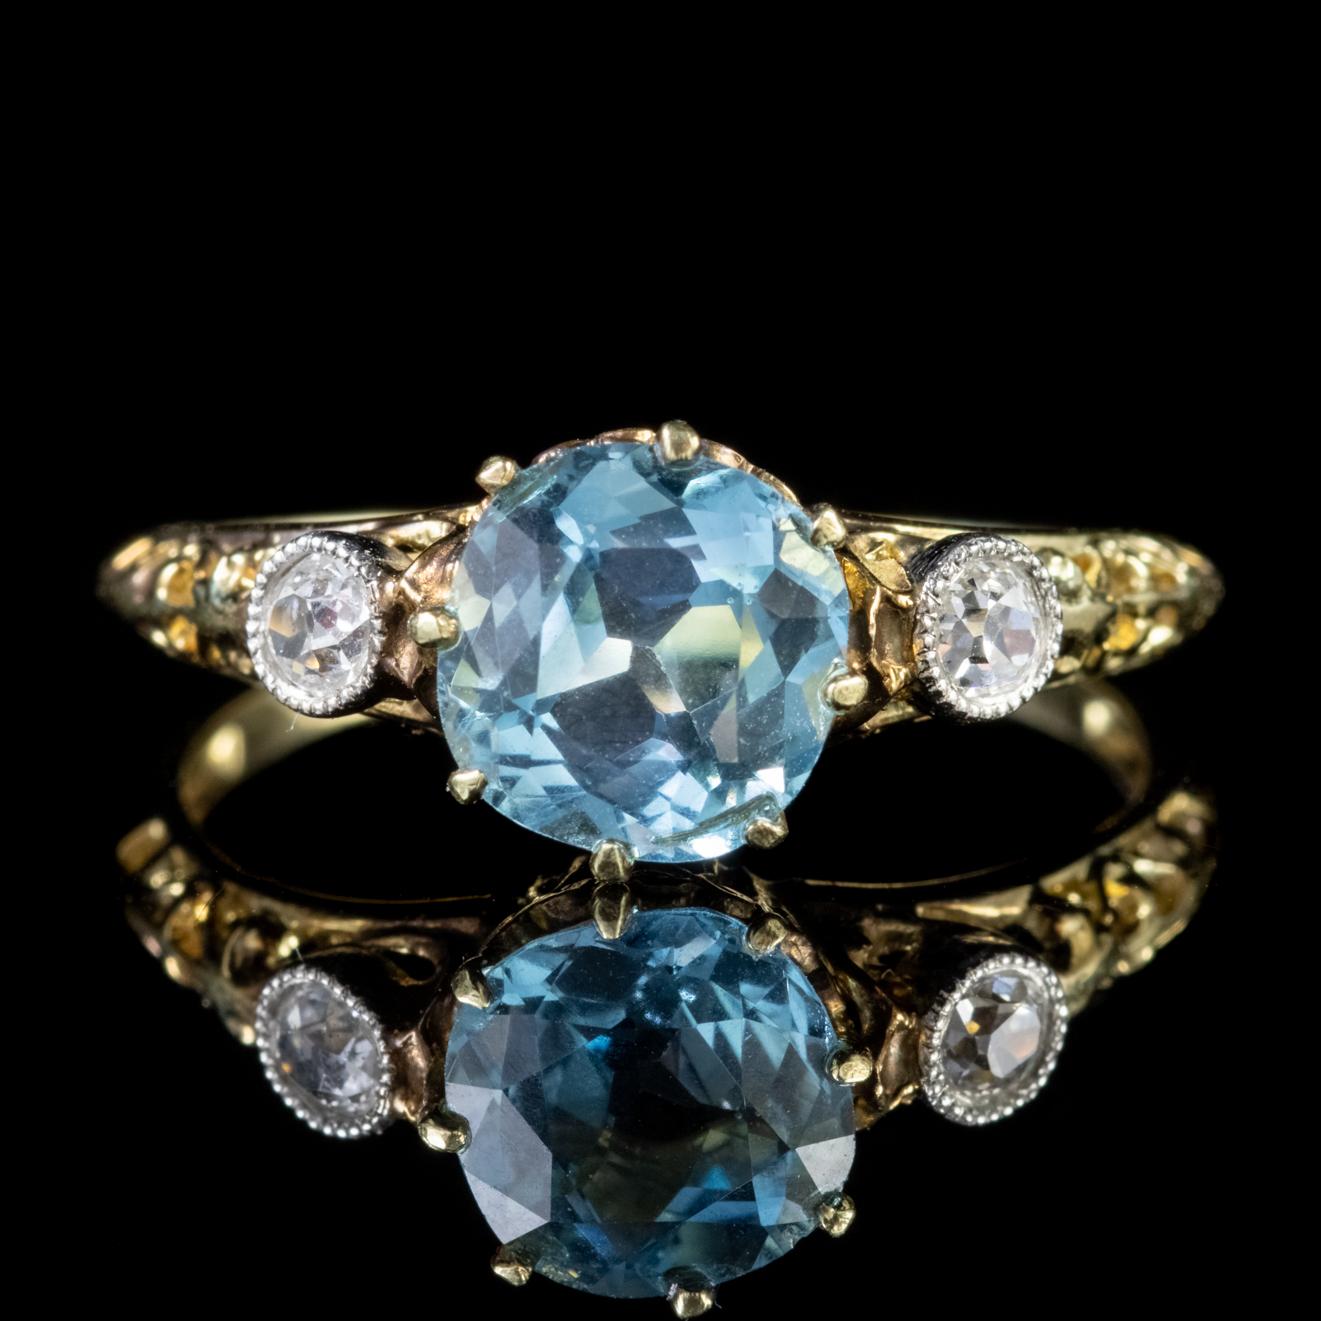 A striking antique Victorian trilogy ring modelled in 18ct Gold and crowned with a beautiful 1.90ct Aquamarine in the centre flanked by two 0.10ct old cut Diamonds. 

Aquamarine is adored for its beautiful clear Ocean blue colour which complements